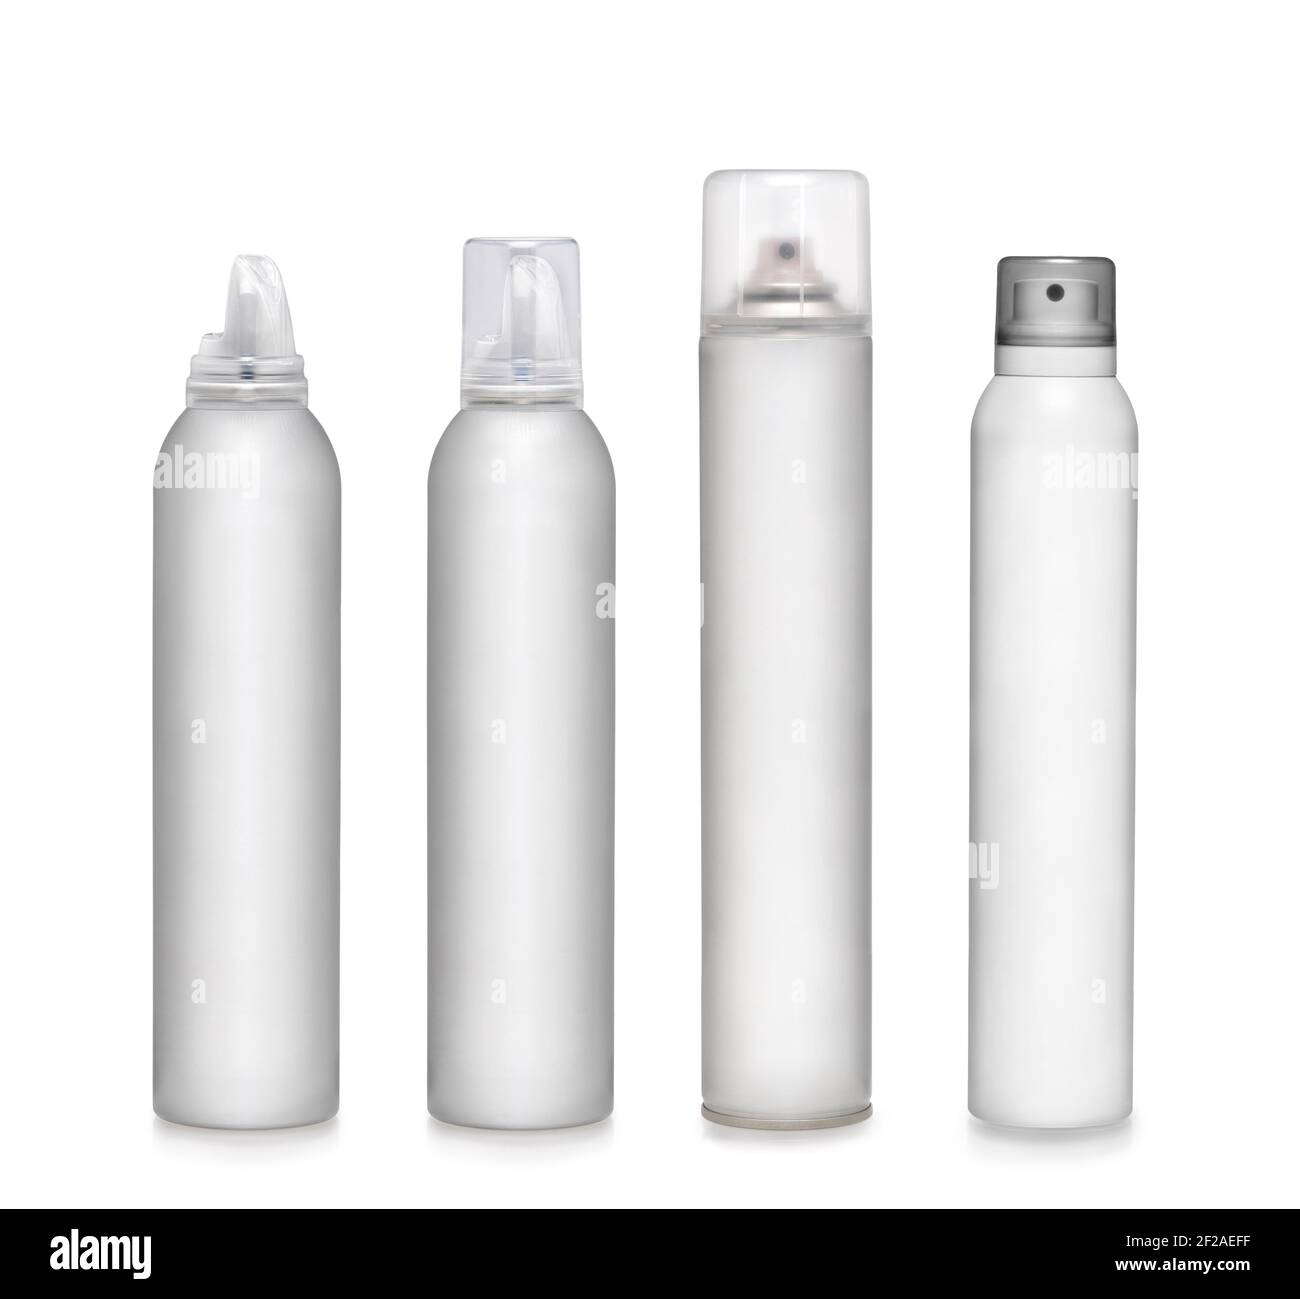 Spray bottles and hair foam containers with no labels against white background Stock Photo